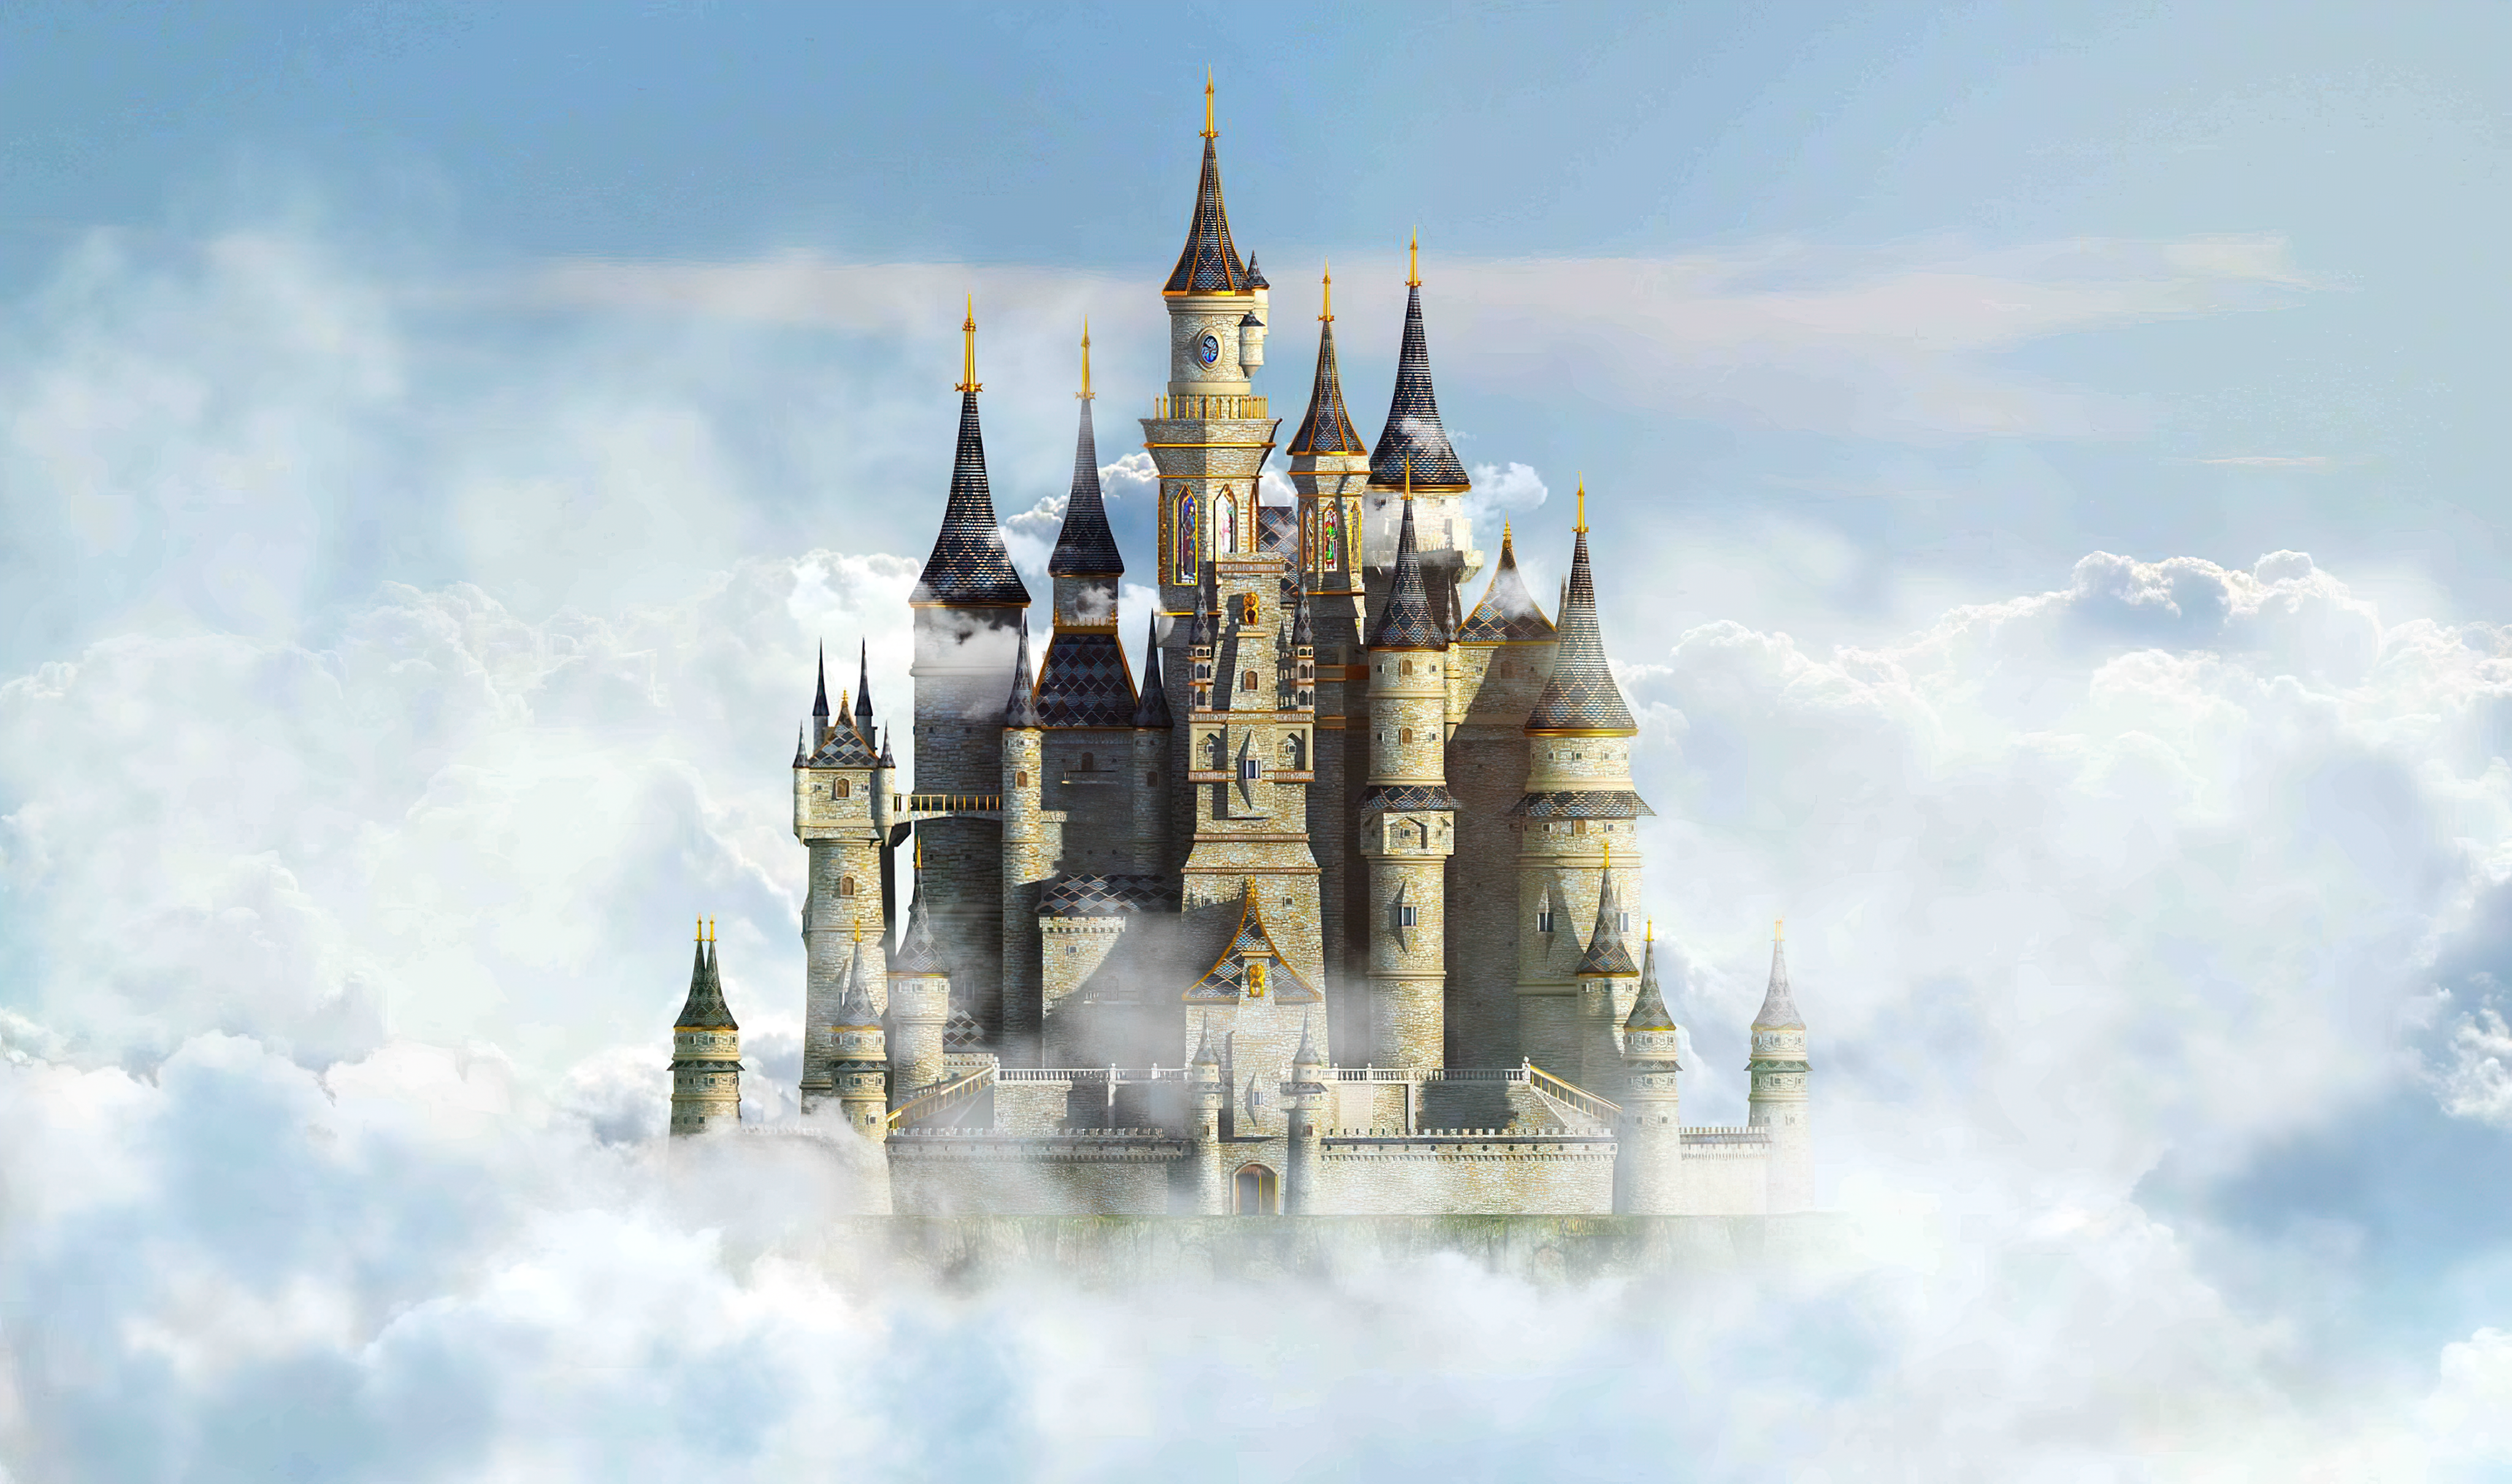 3D Model of a Castle in the Sky